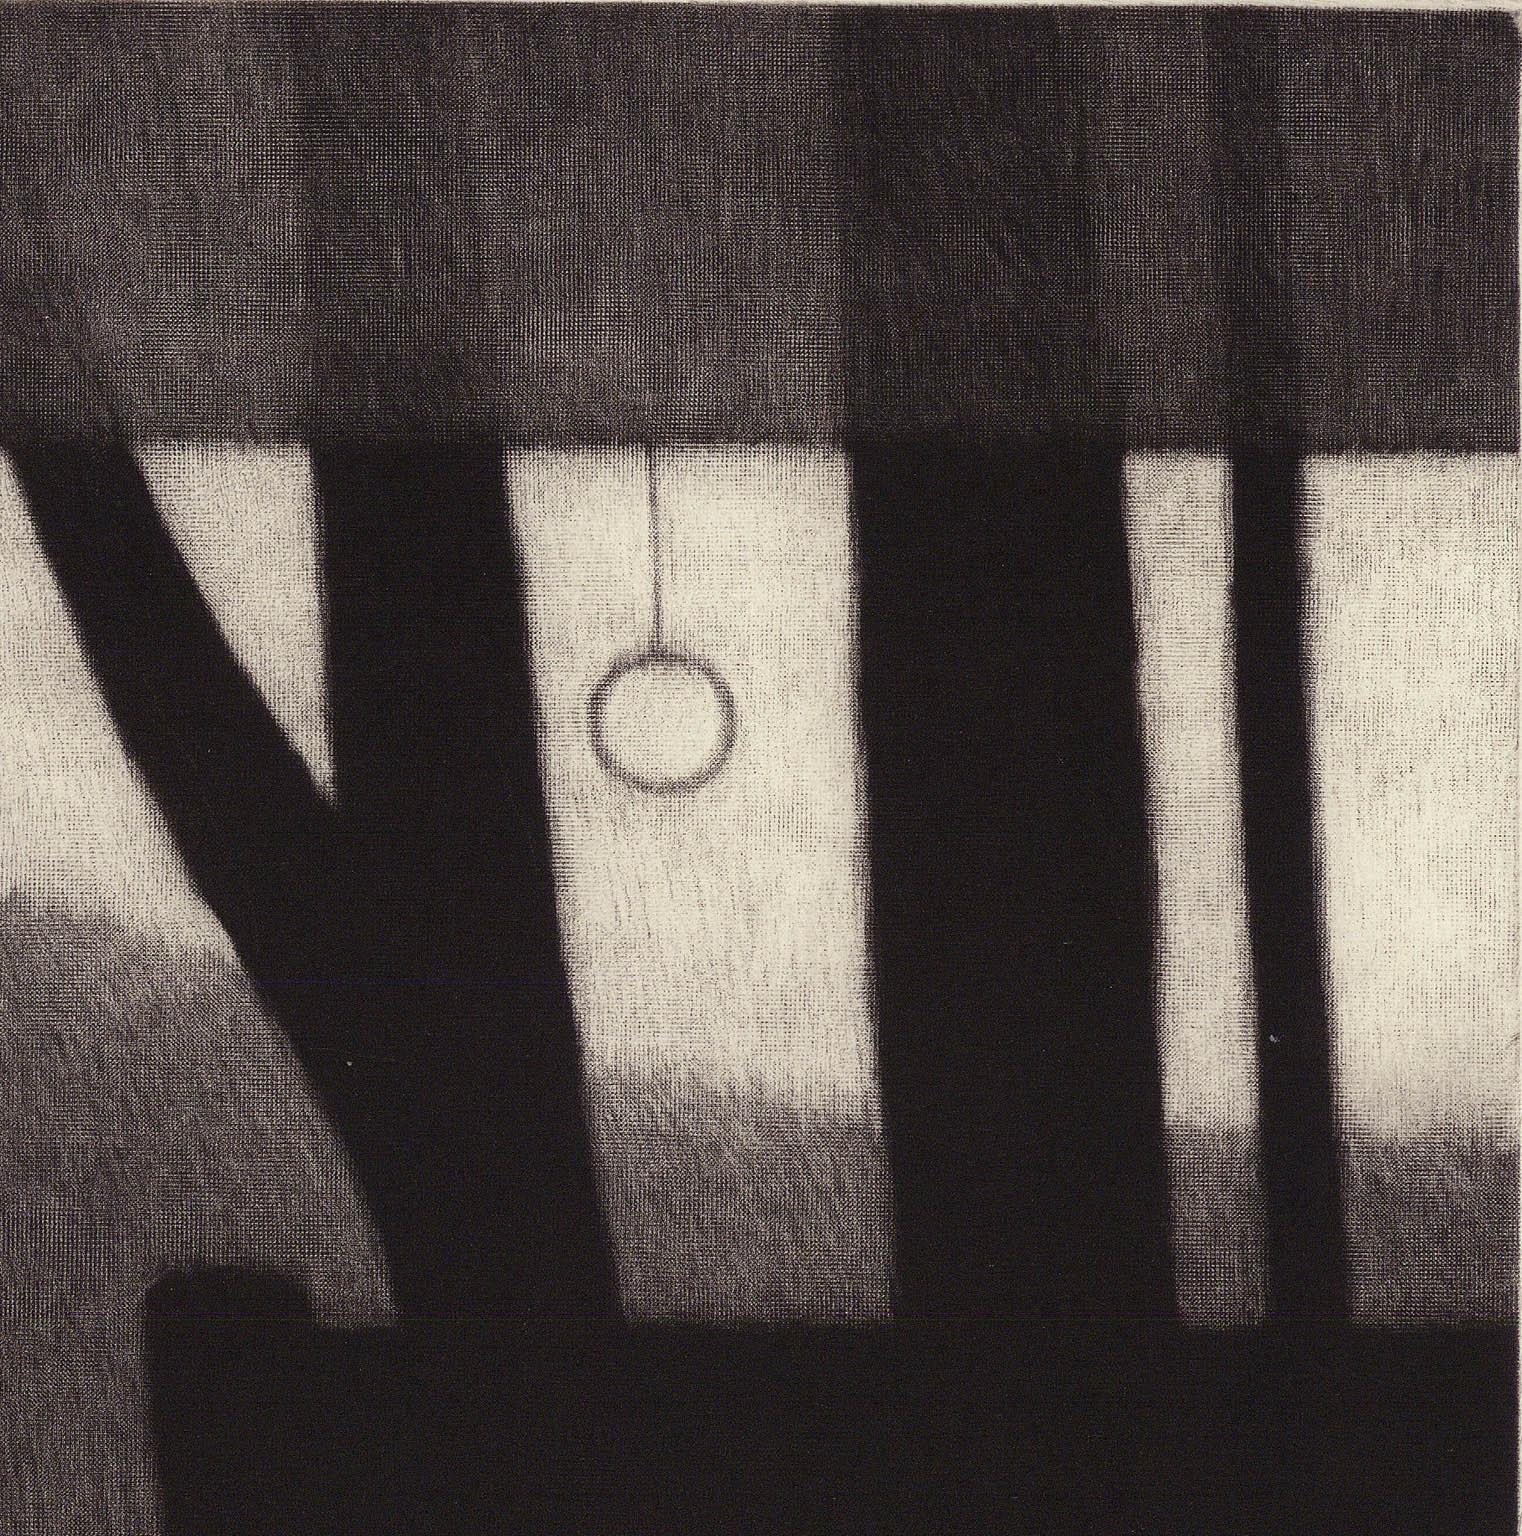 “Window w/shade, chair, vase & trees” is a mezzotint engraving created by Robert Kipniss in 2017. The paper size is 13.50 x 12 inches and the printed image size is 7.75 x 7 inches. This impression is signed in pencil and inscribed 